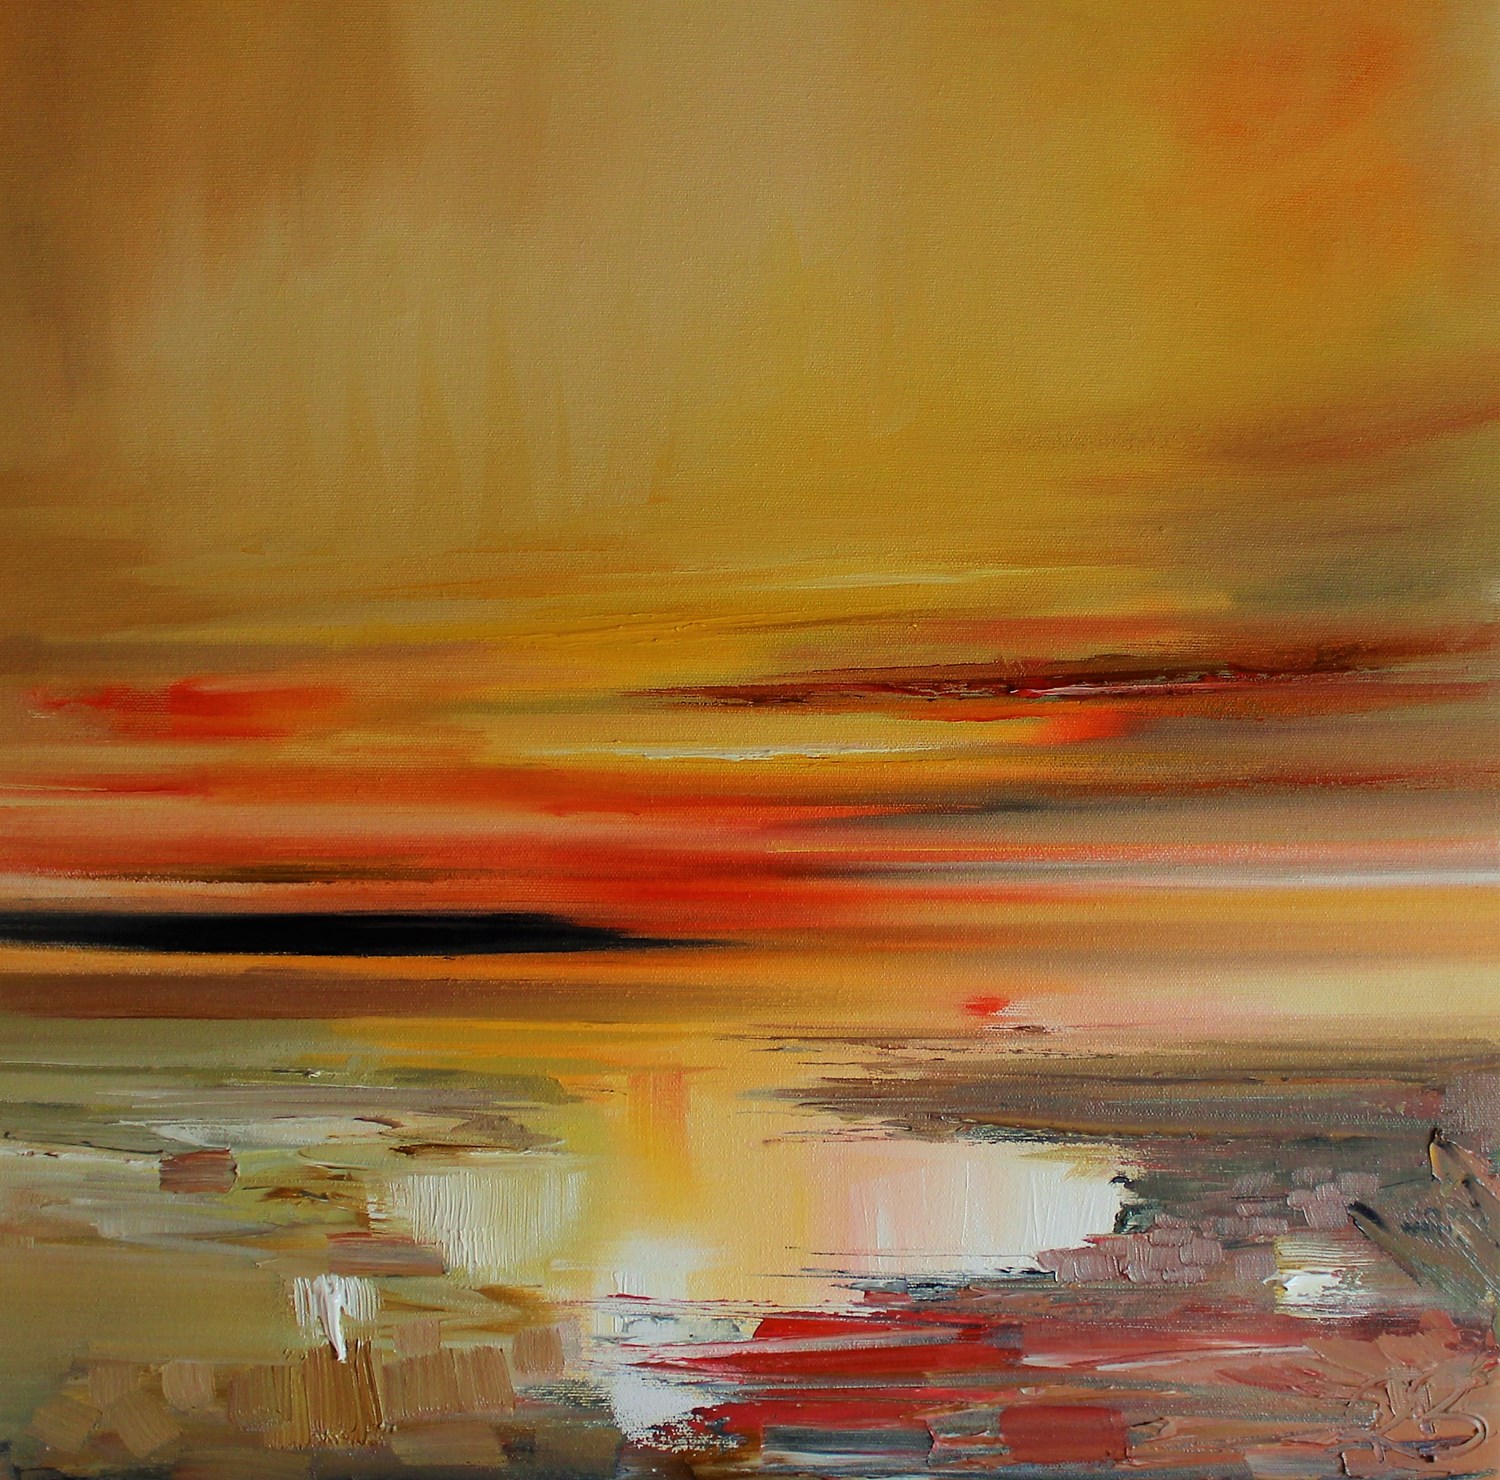 'Pool lit by Sunset' by artist Rosanne Barr